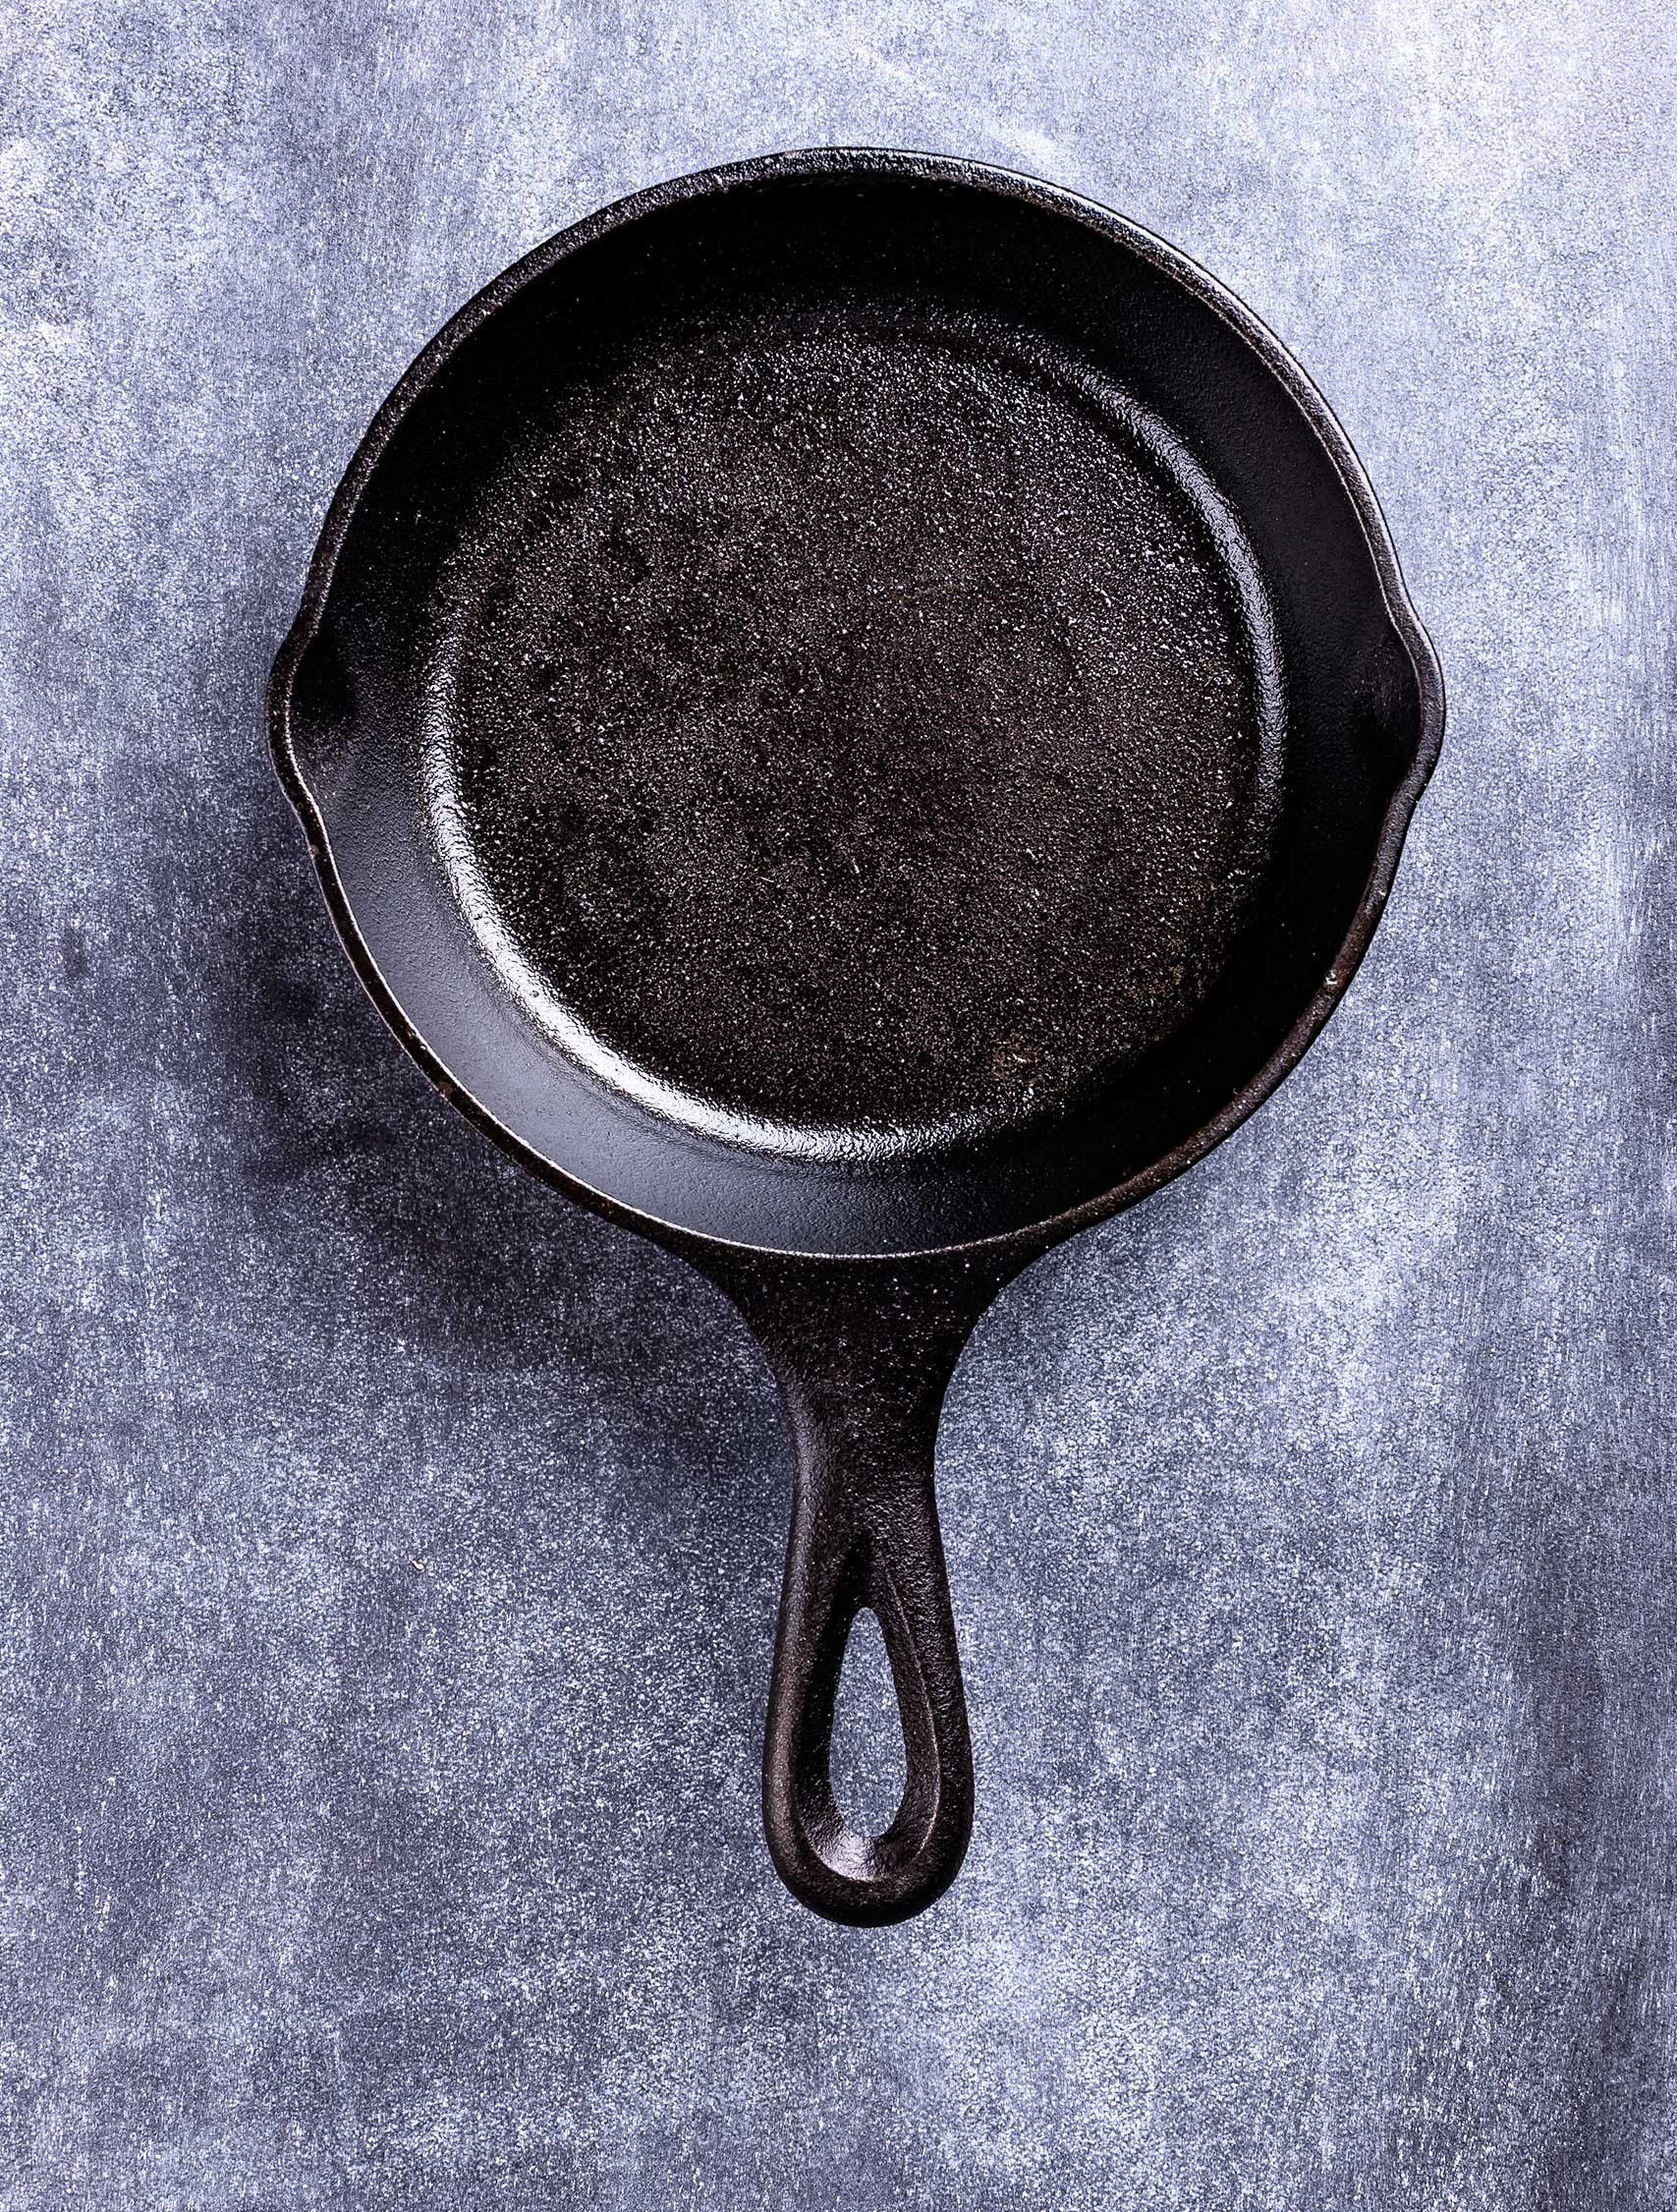 Everything You Need to Know About Using a Cast Iron Skillet